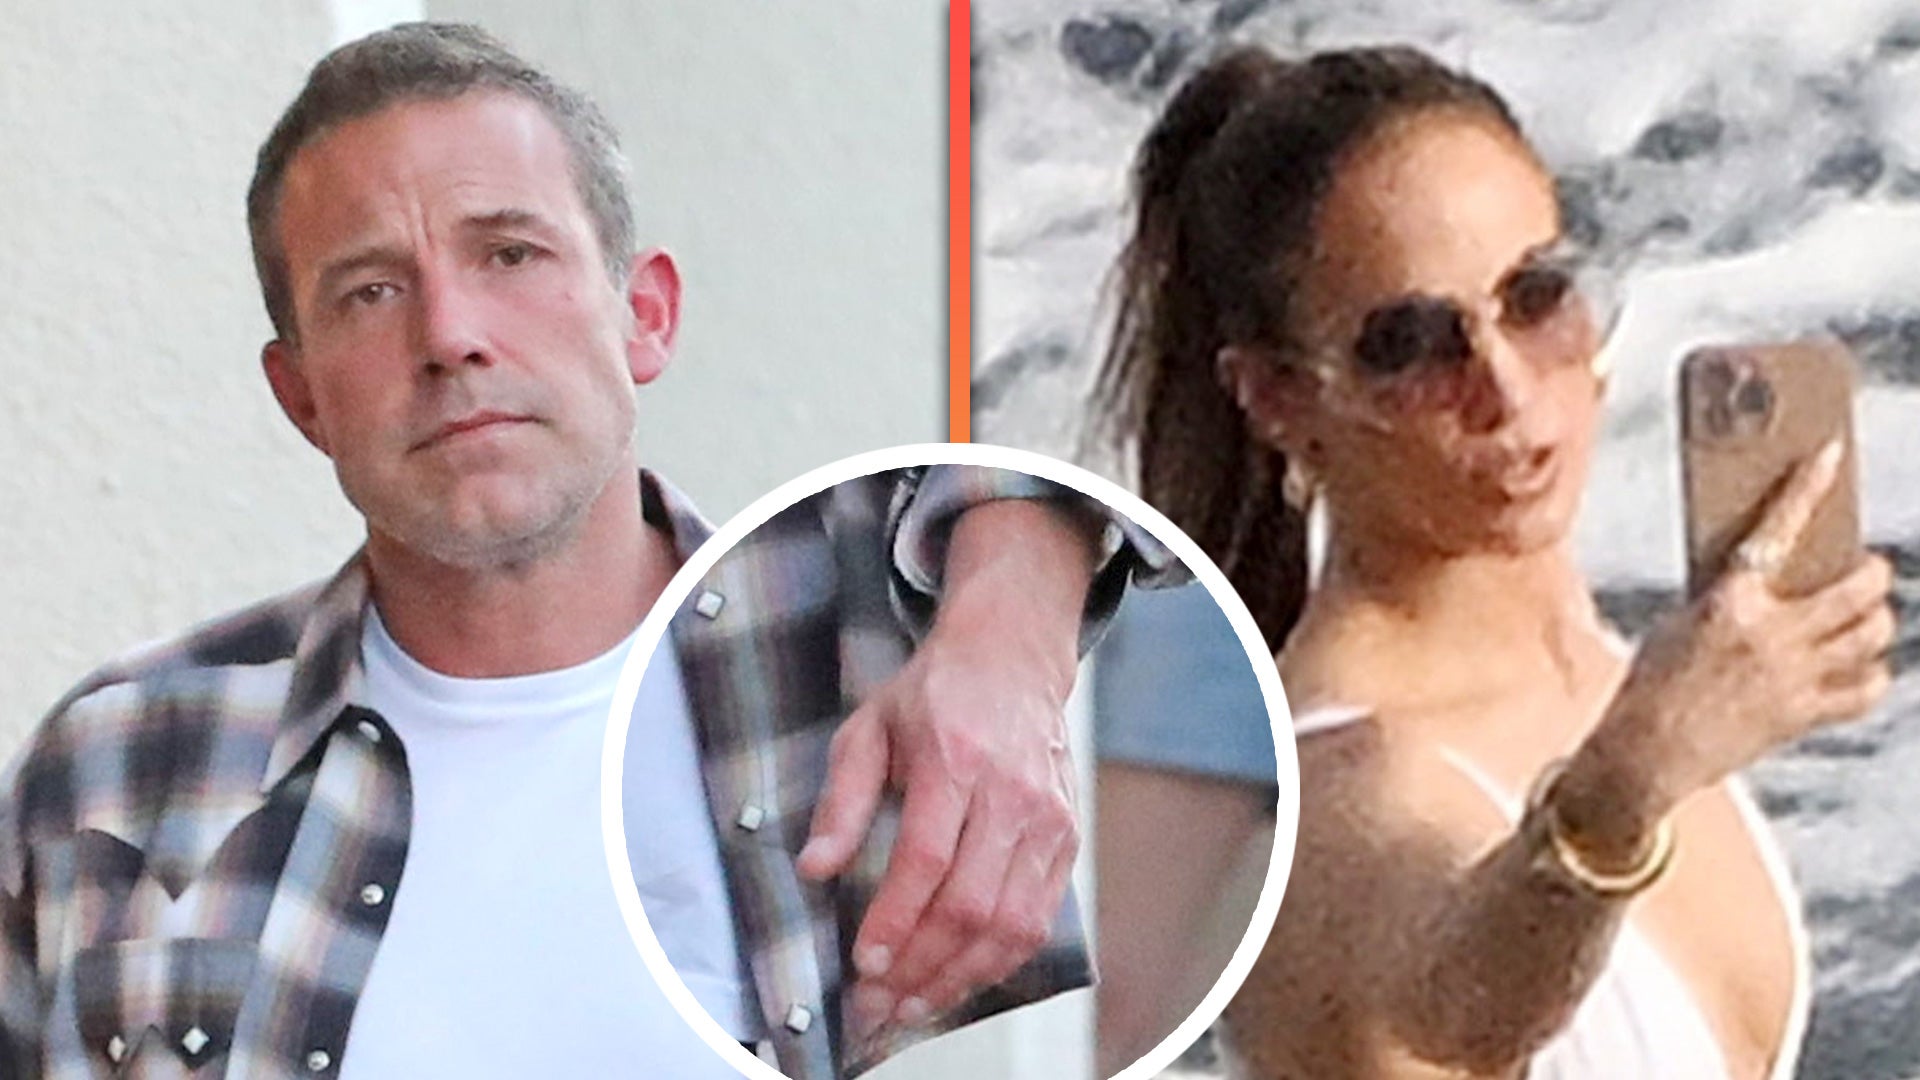 Ben Affleck Ditches Wedding Ring During Dinner Date With Daughter as J.Lo Vacations in Italy